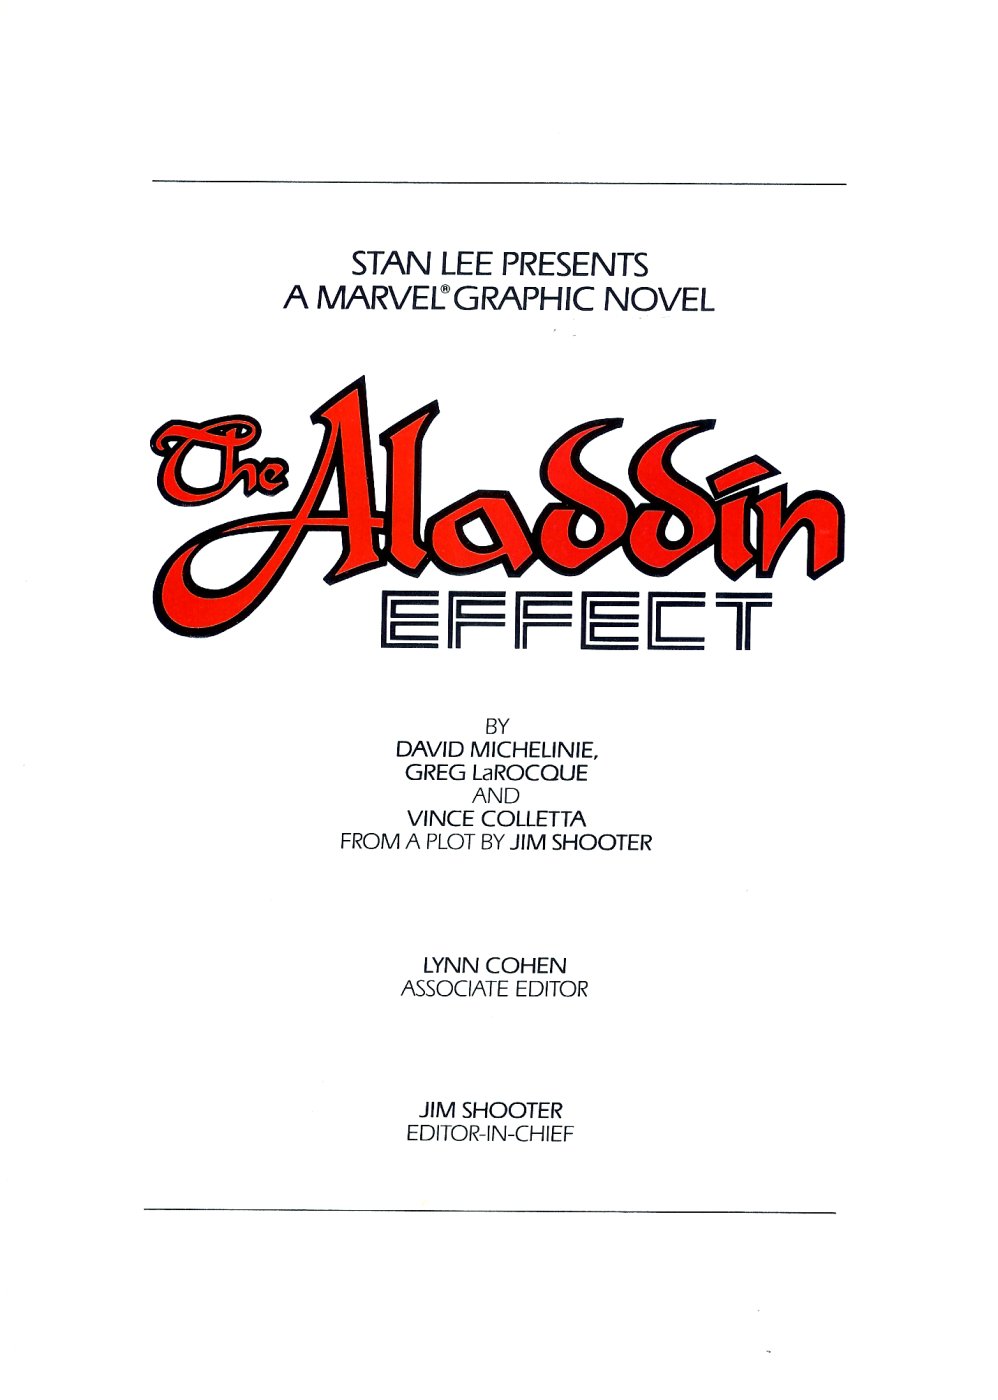 Read online Marvel Graphic Novel comic -  Issue #16 - The Aladdin Effect - 2